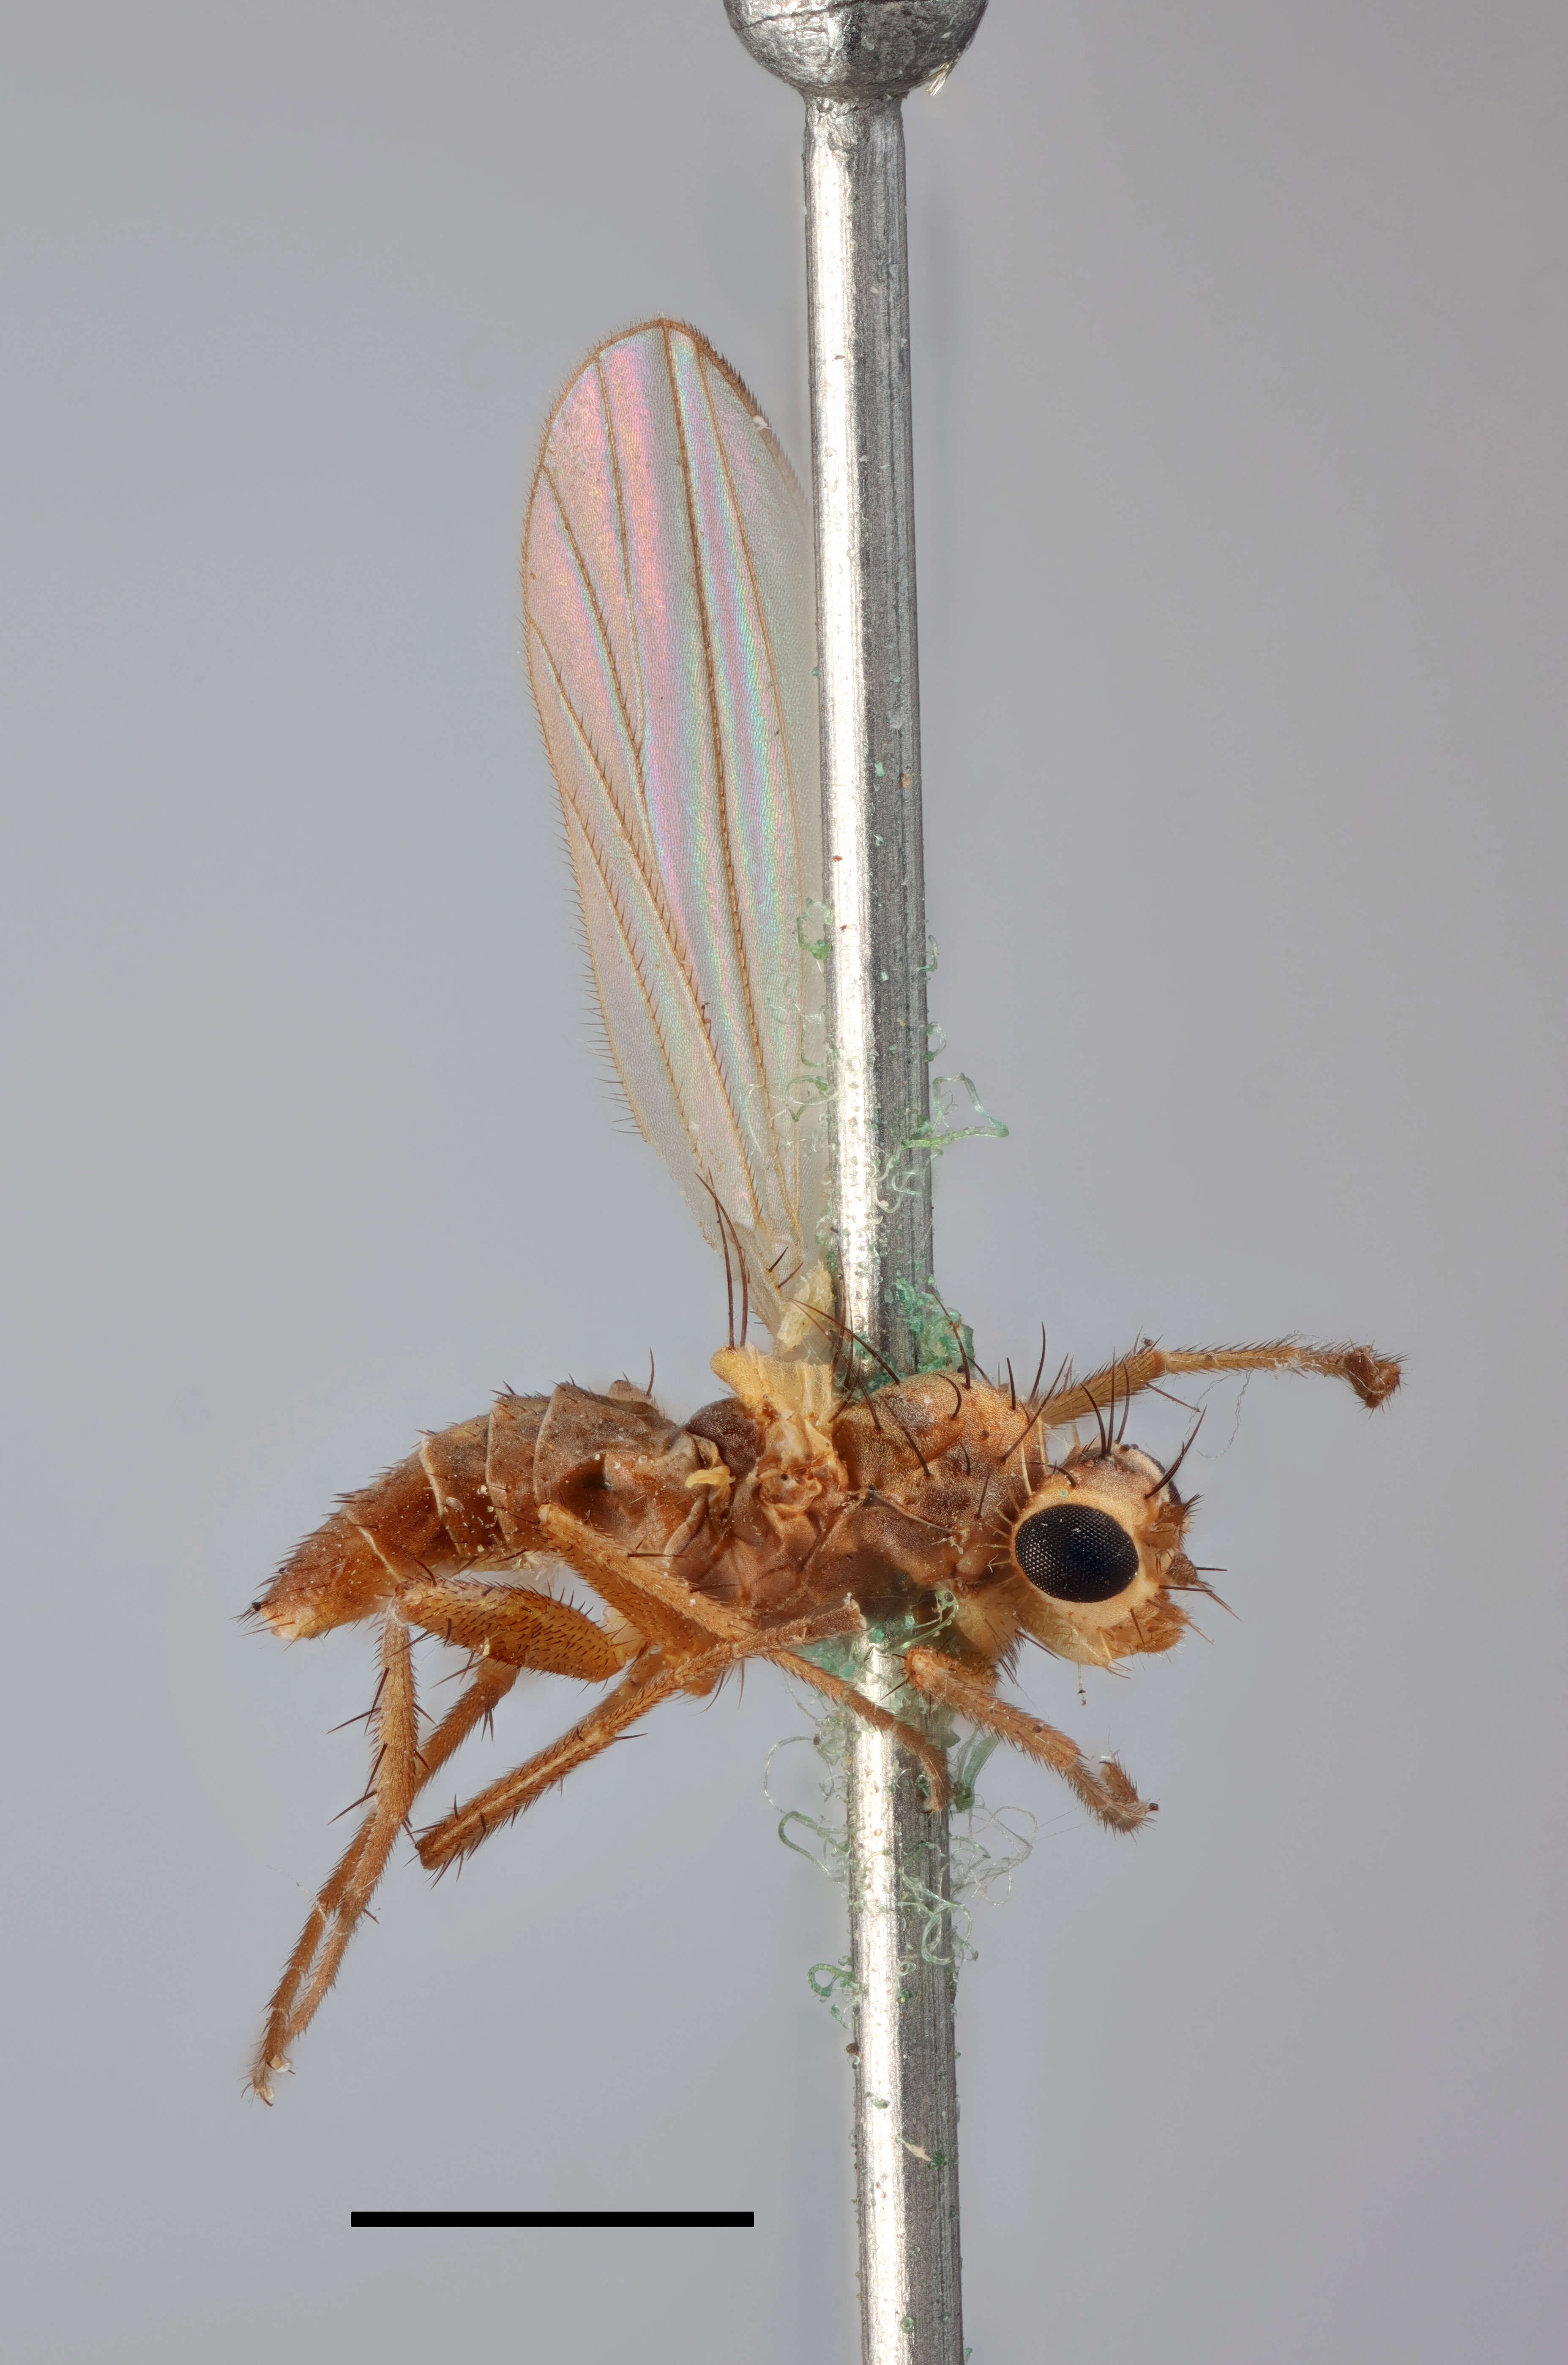 Image of spear-winged flies